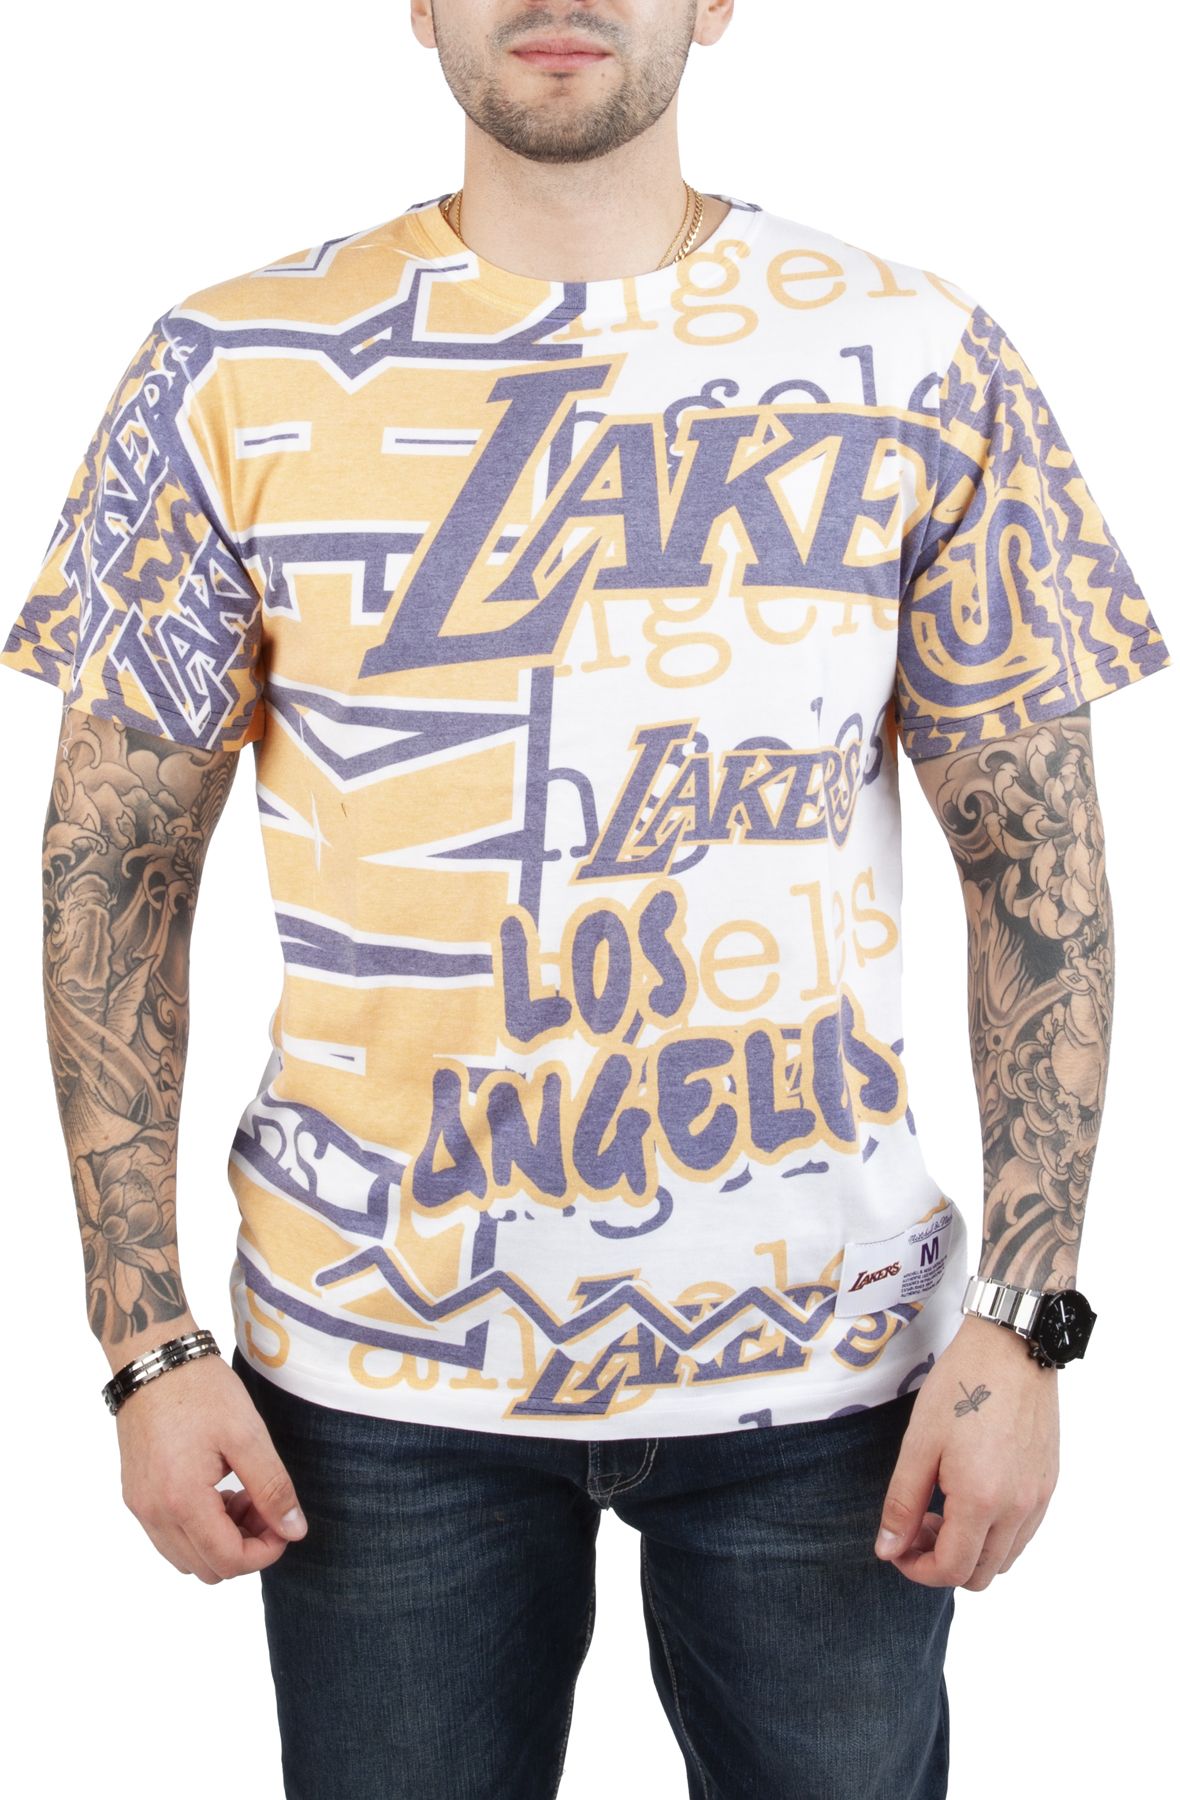 Nike Mens Los Angeles Lakers Lakers Statement All Over Print T